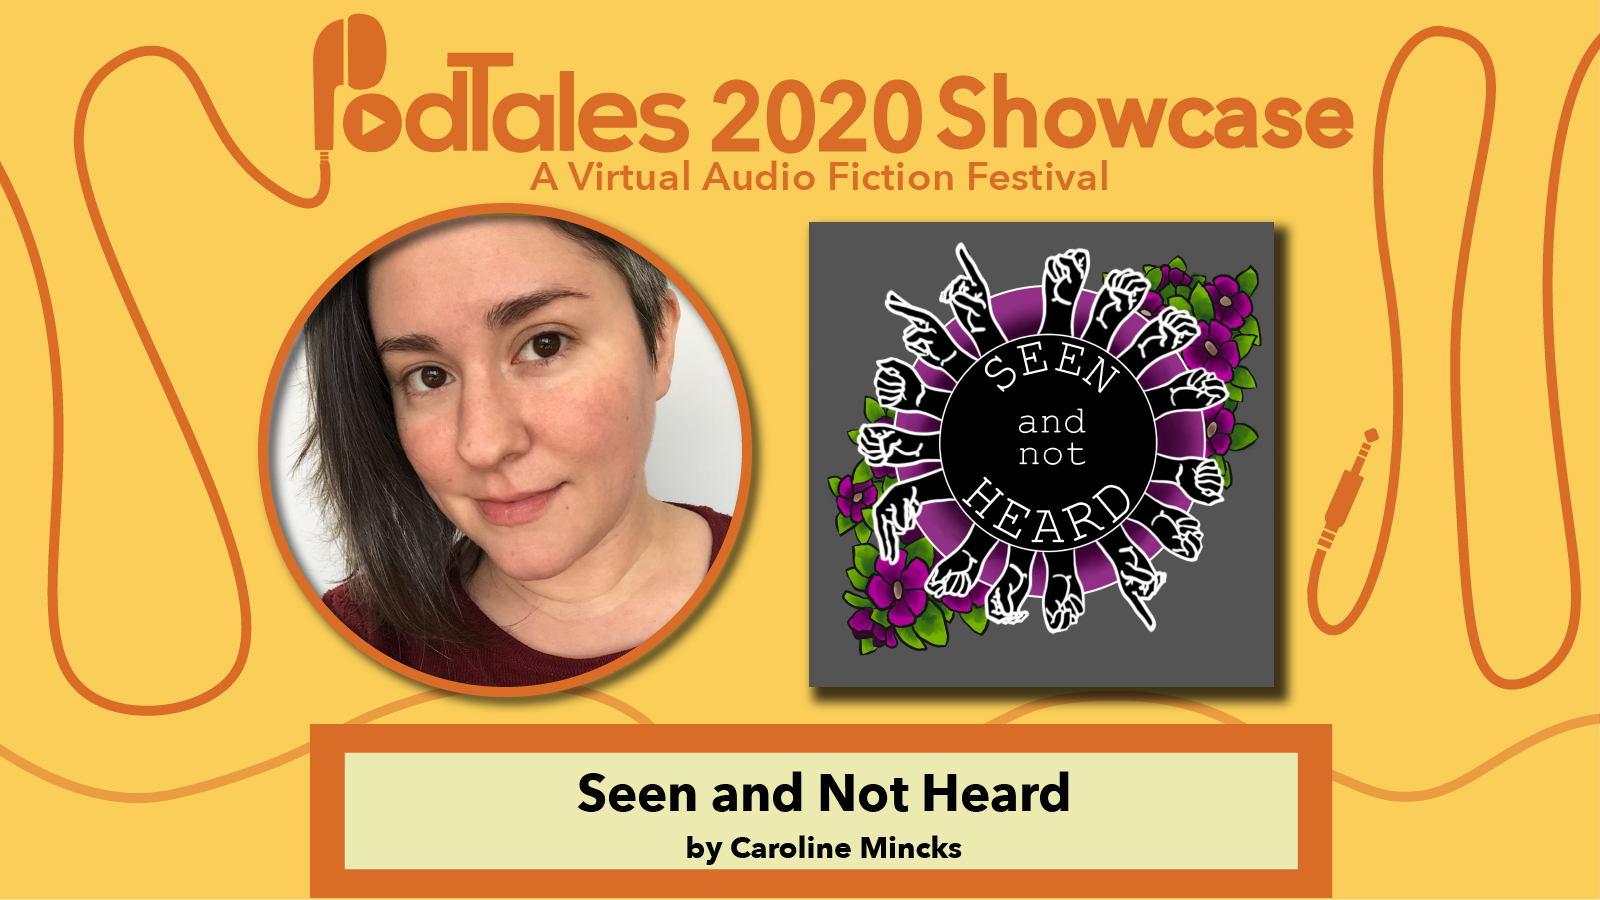 Text reading “PodTales 2020 Showcase: A Virtual Audio Fiction Festival”, Photo of Caroline Mincks, Show Art for Seen and Not Heard, Text reading “Seen and Not Heard by Caroline Mincks”